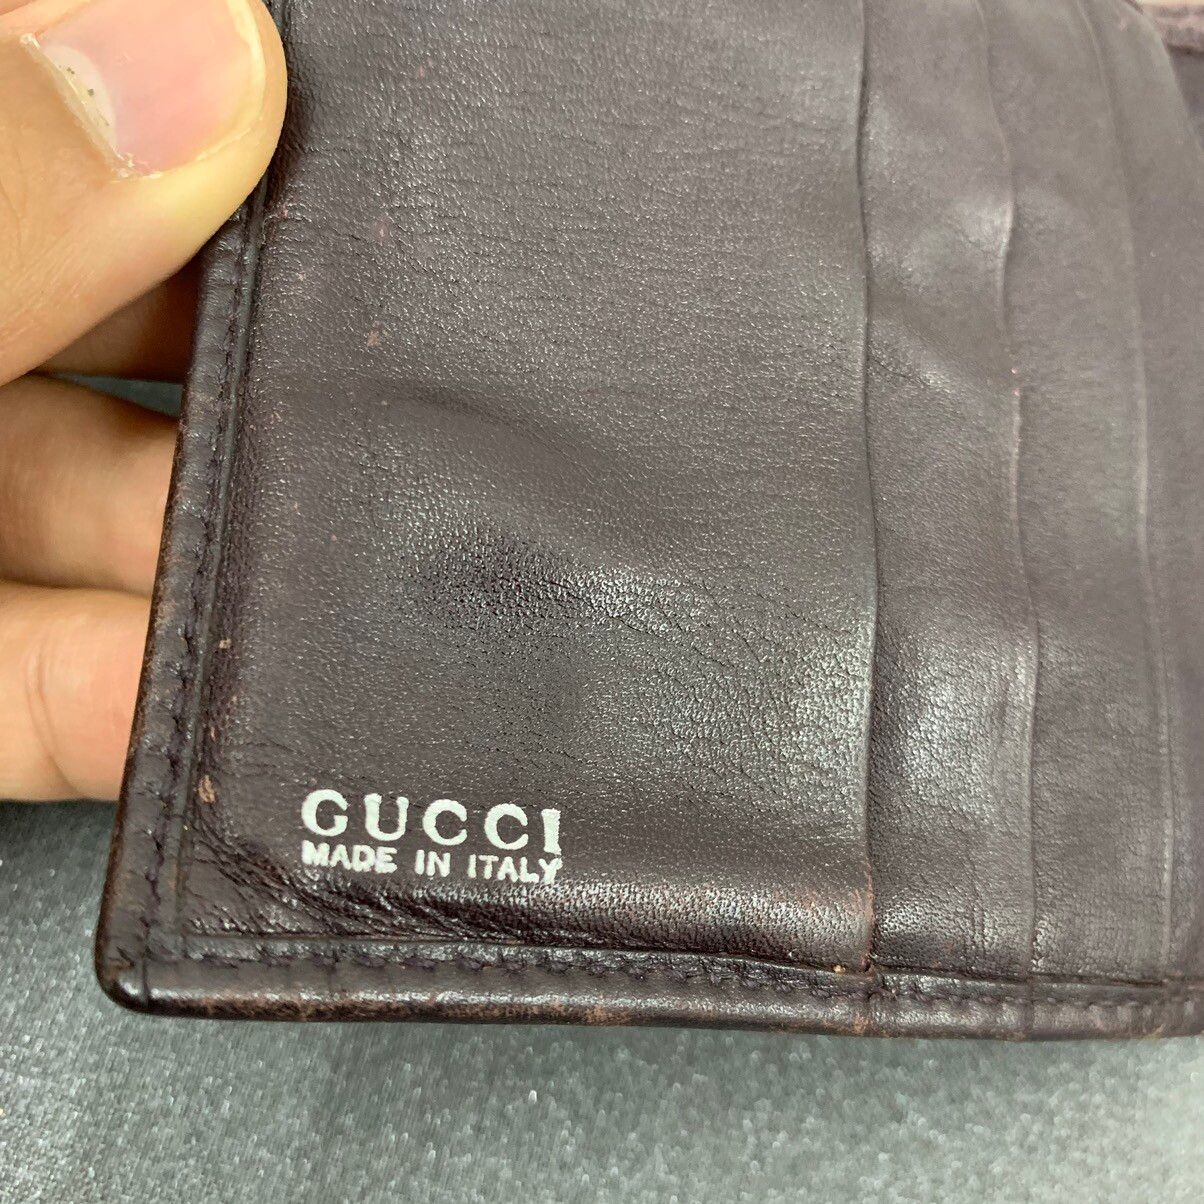 Thrashed Gucci Leather Wallet - 5